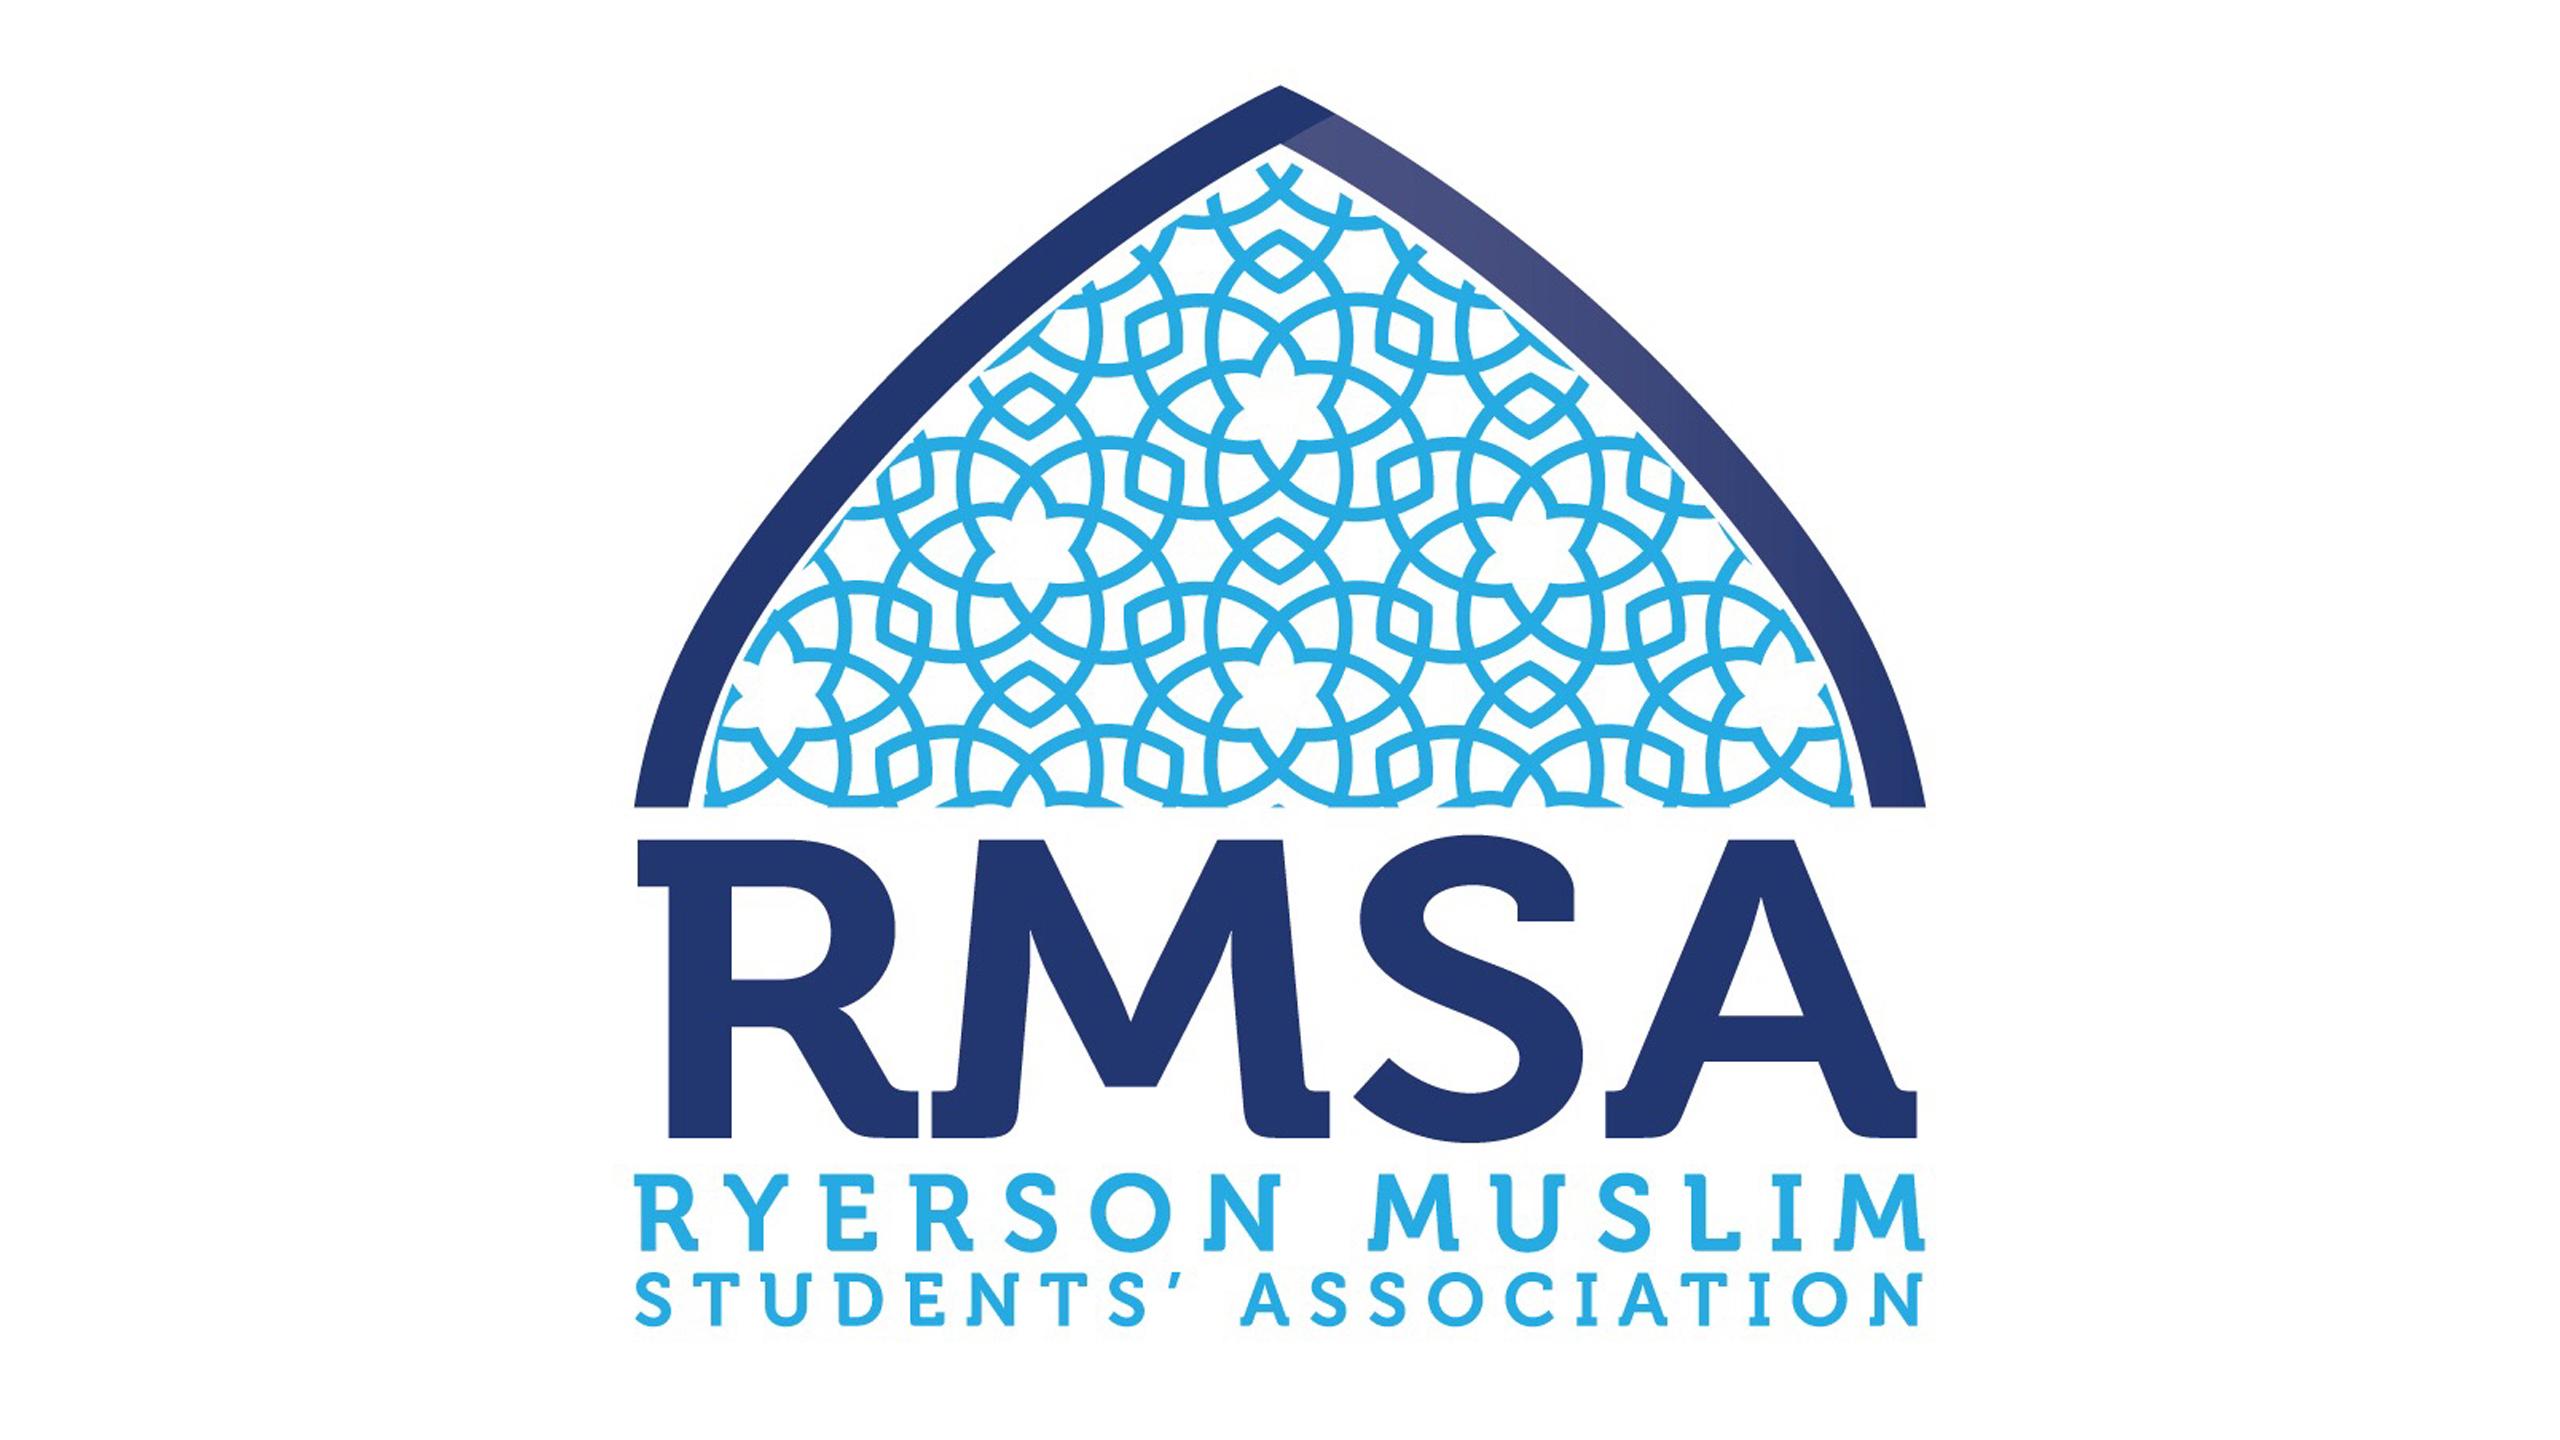 The logo for the Ryerson Muslim Students' Association.